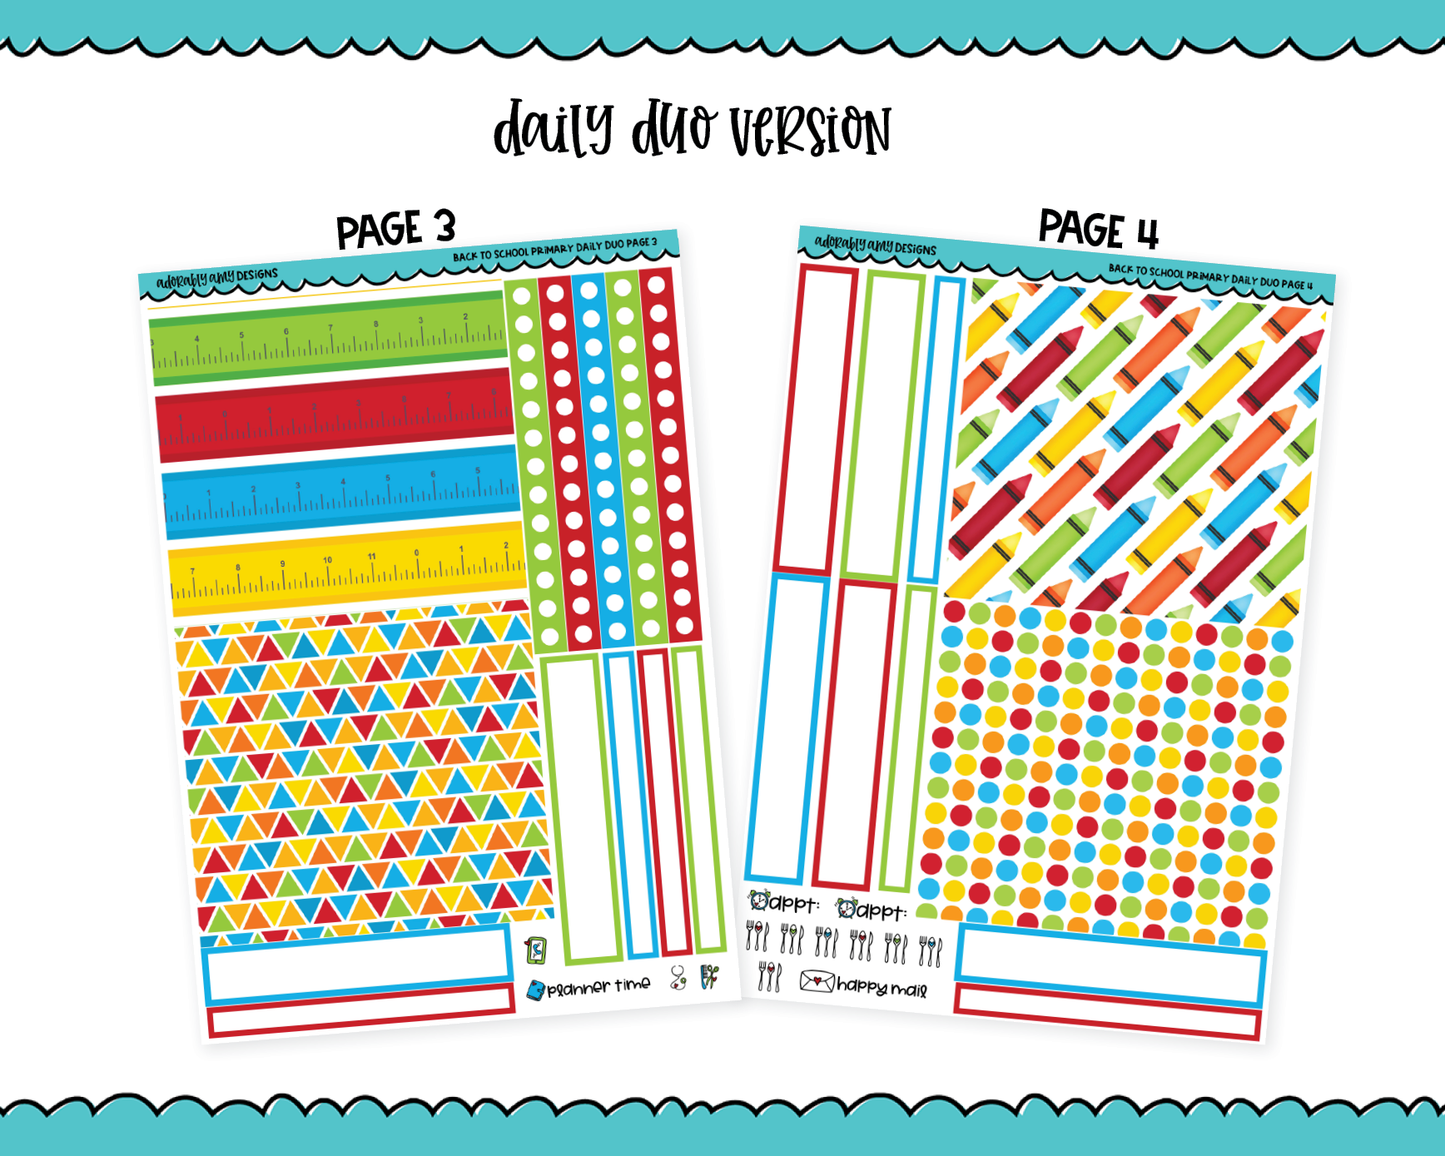 Daily Duo Not Back to School Primary Themed Weekly Planner Sticker Kit for Daily Duo Planner